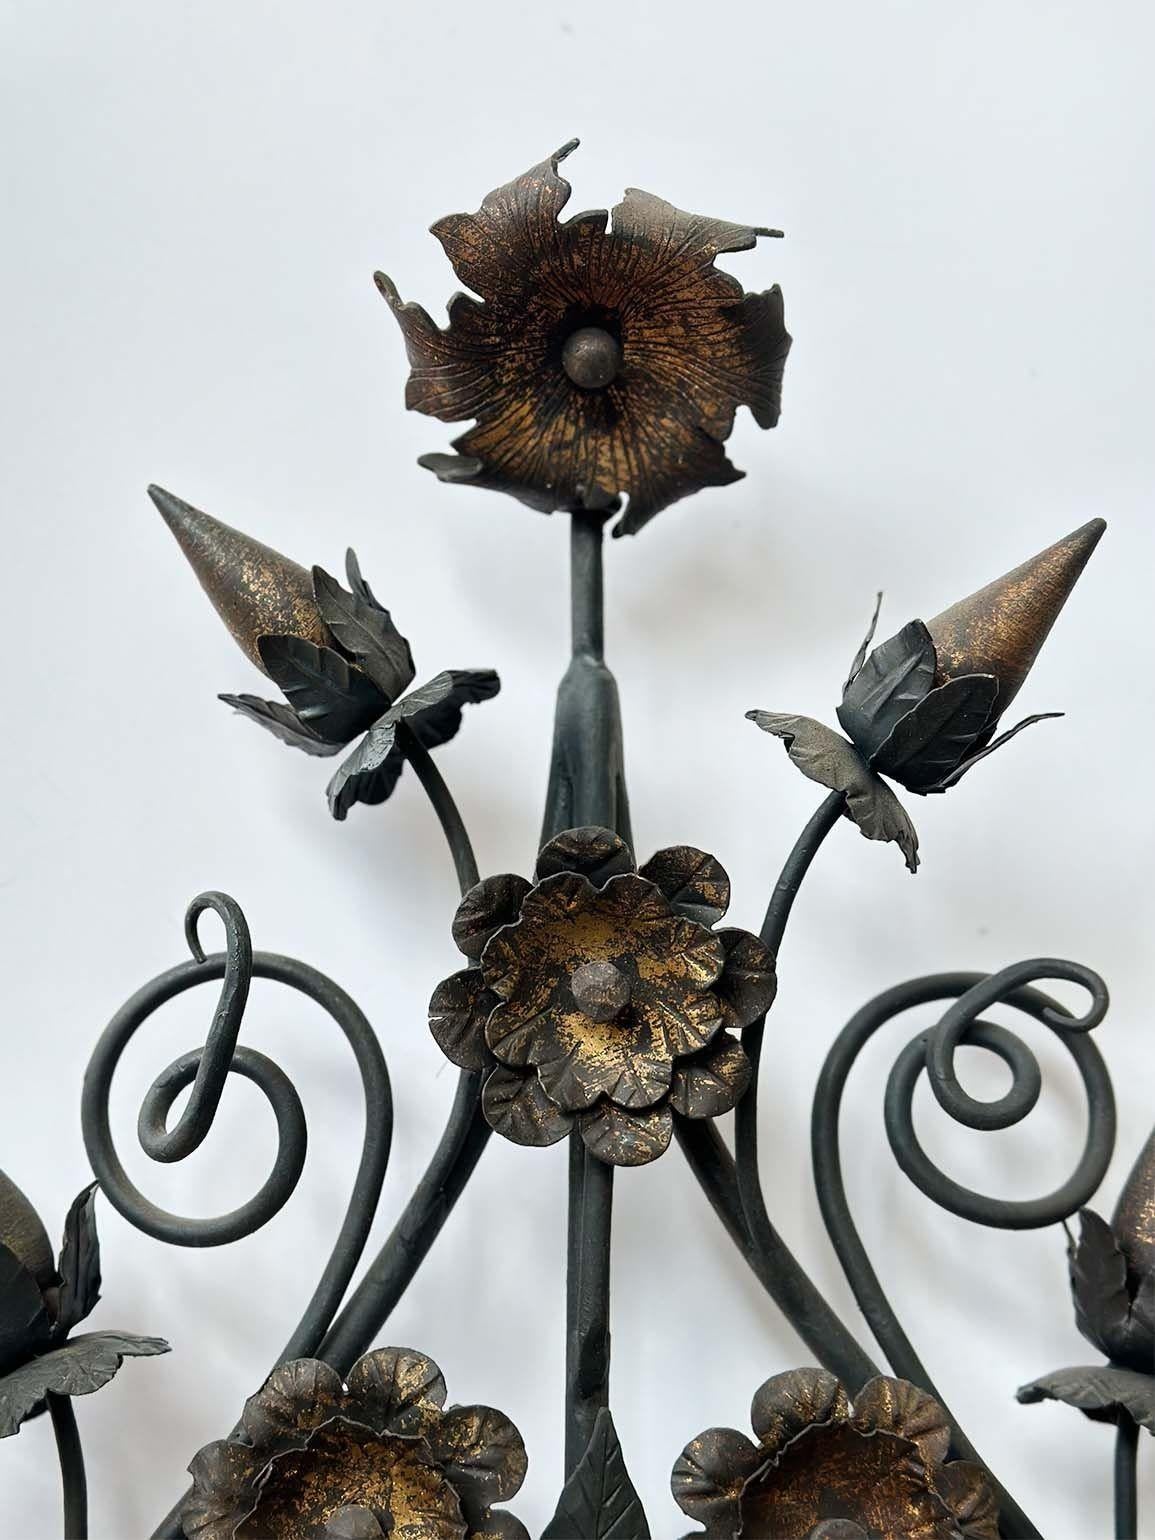 Pair of beautiful oversized girandoles made in Italy in the 1900's. The pairing boasts stunning hand-made wrought ironwork and hand-carved wooden bases.
Each girandole showcases ten candelabra sockets, each rewired to fit US standard, ensuring a